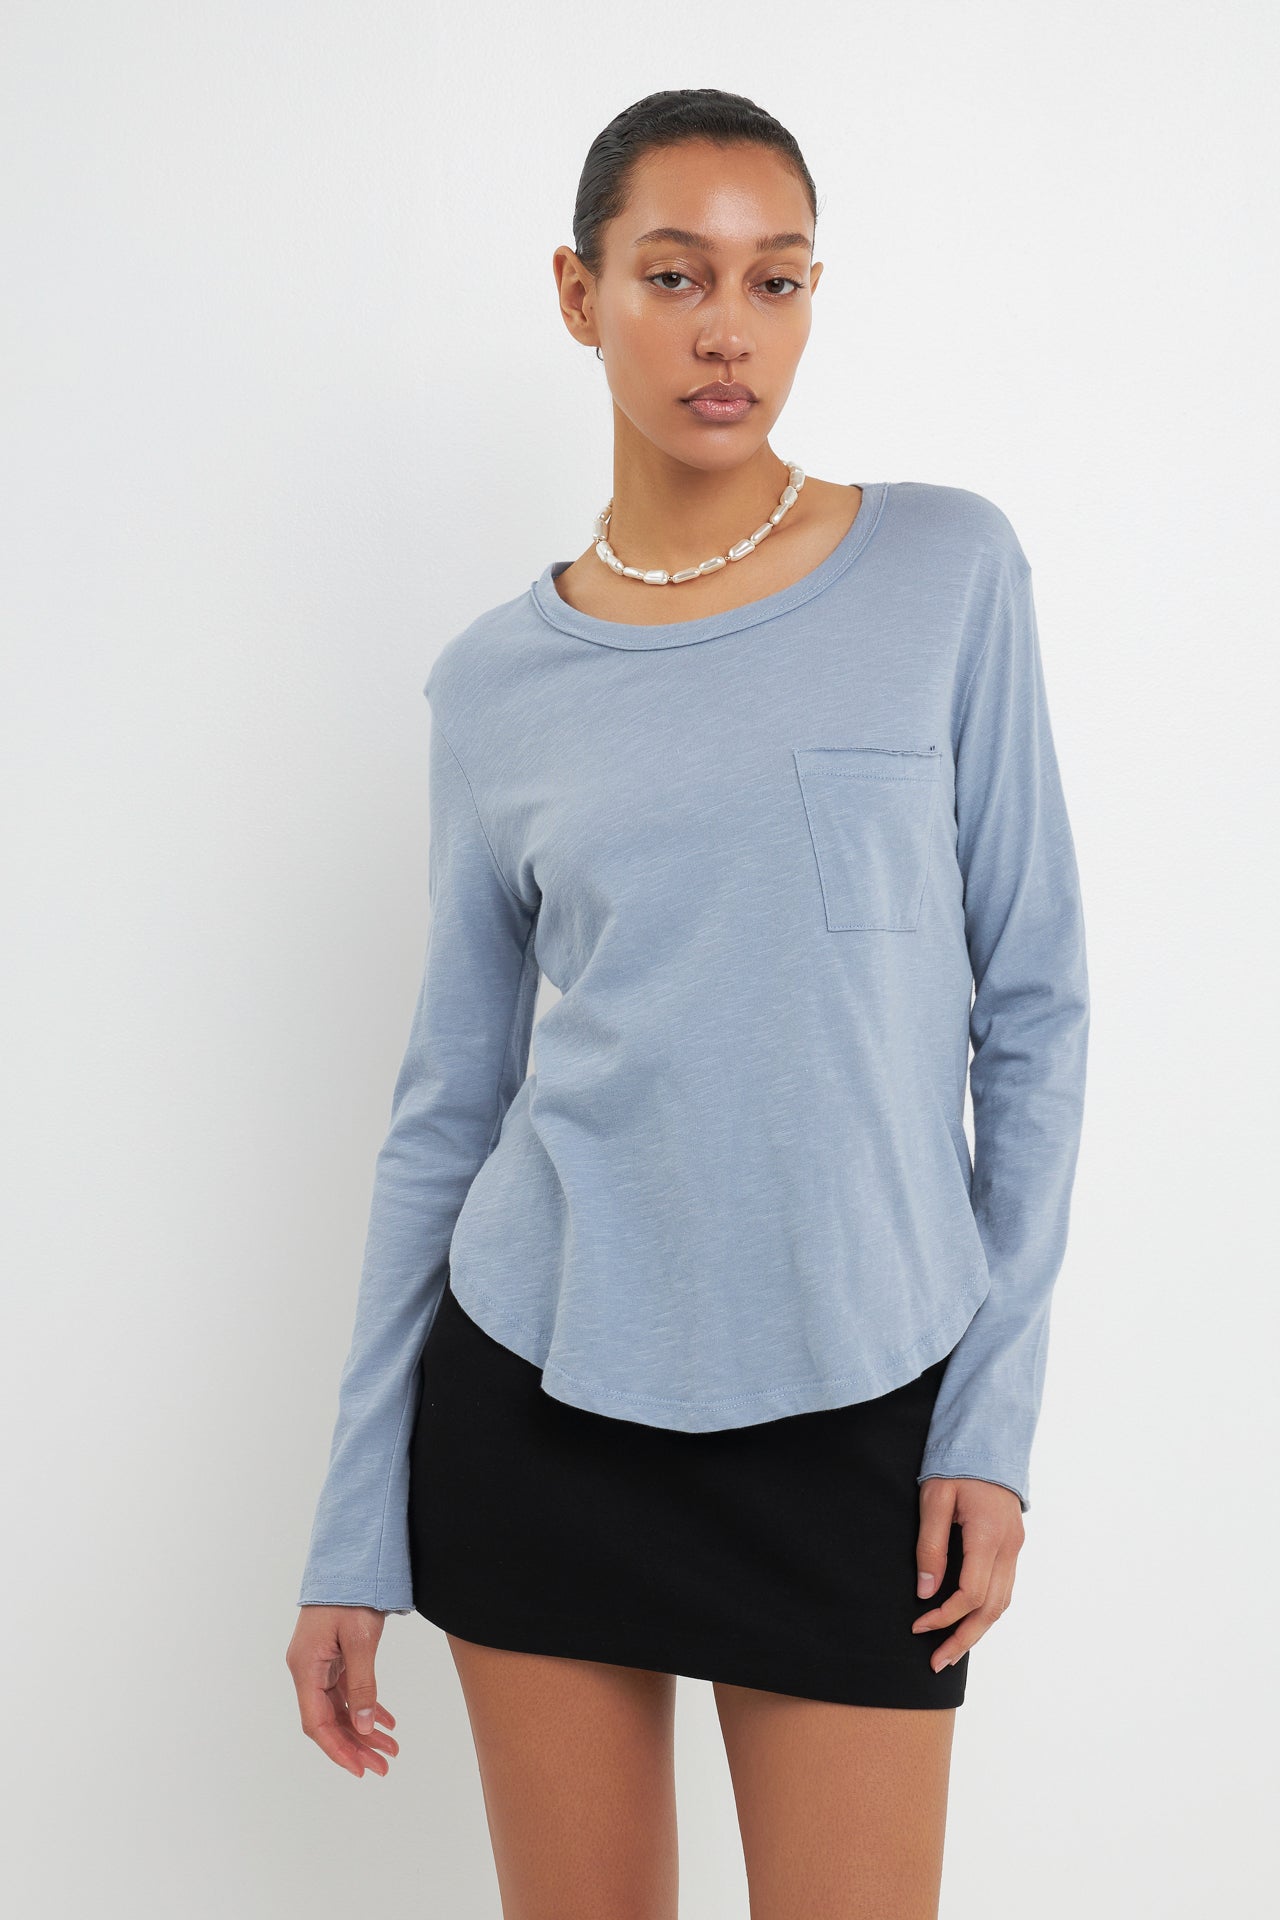 GREY LAB - Classic Round Neck Long Sleeves - T-SHIRTS available at Objectrare